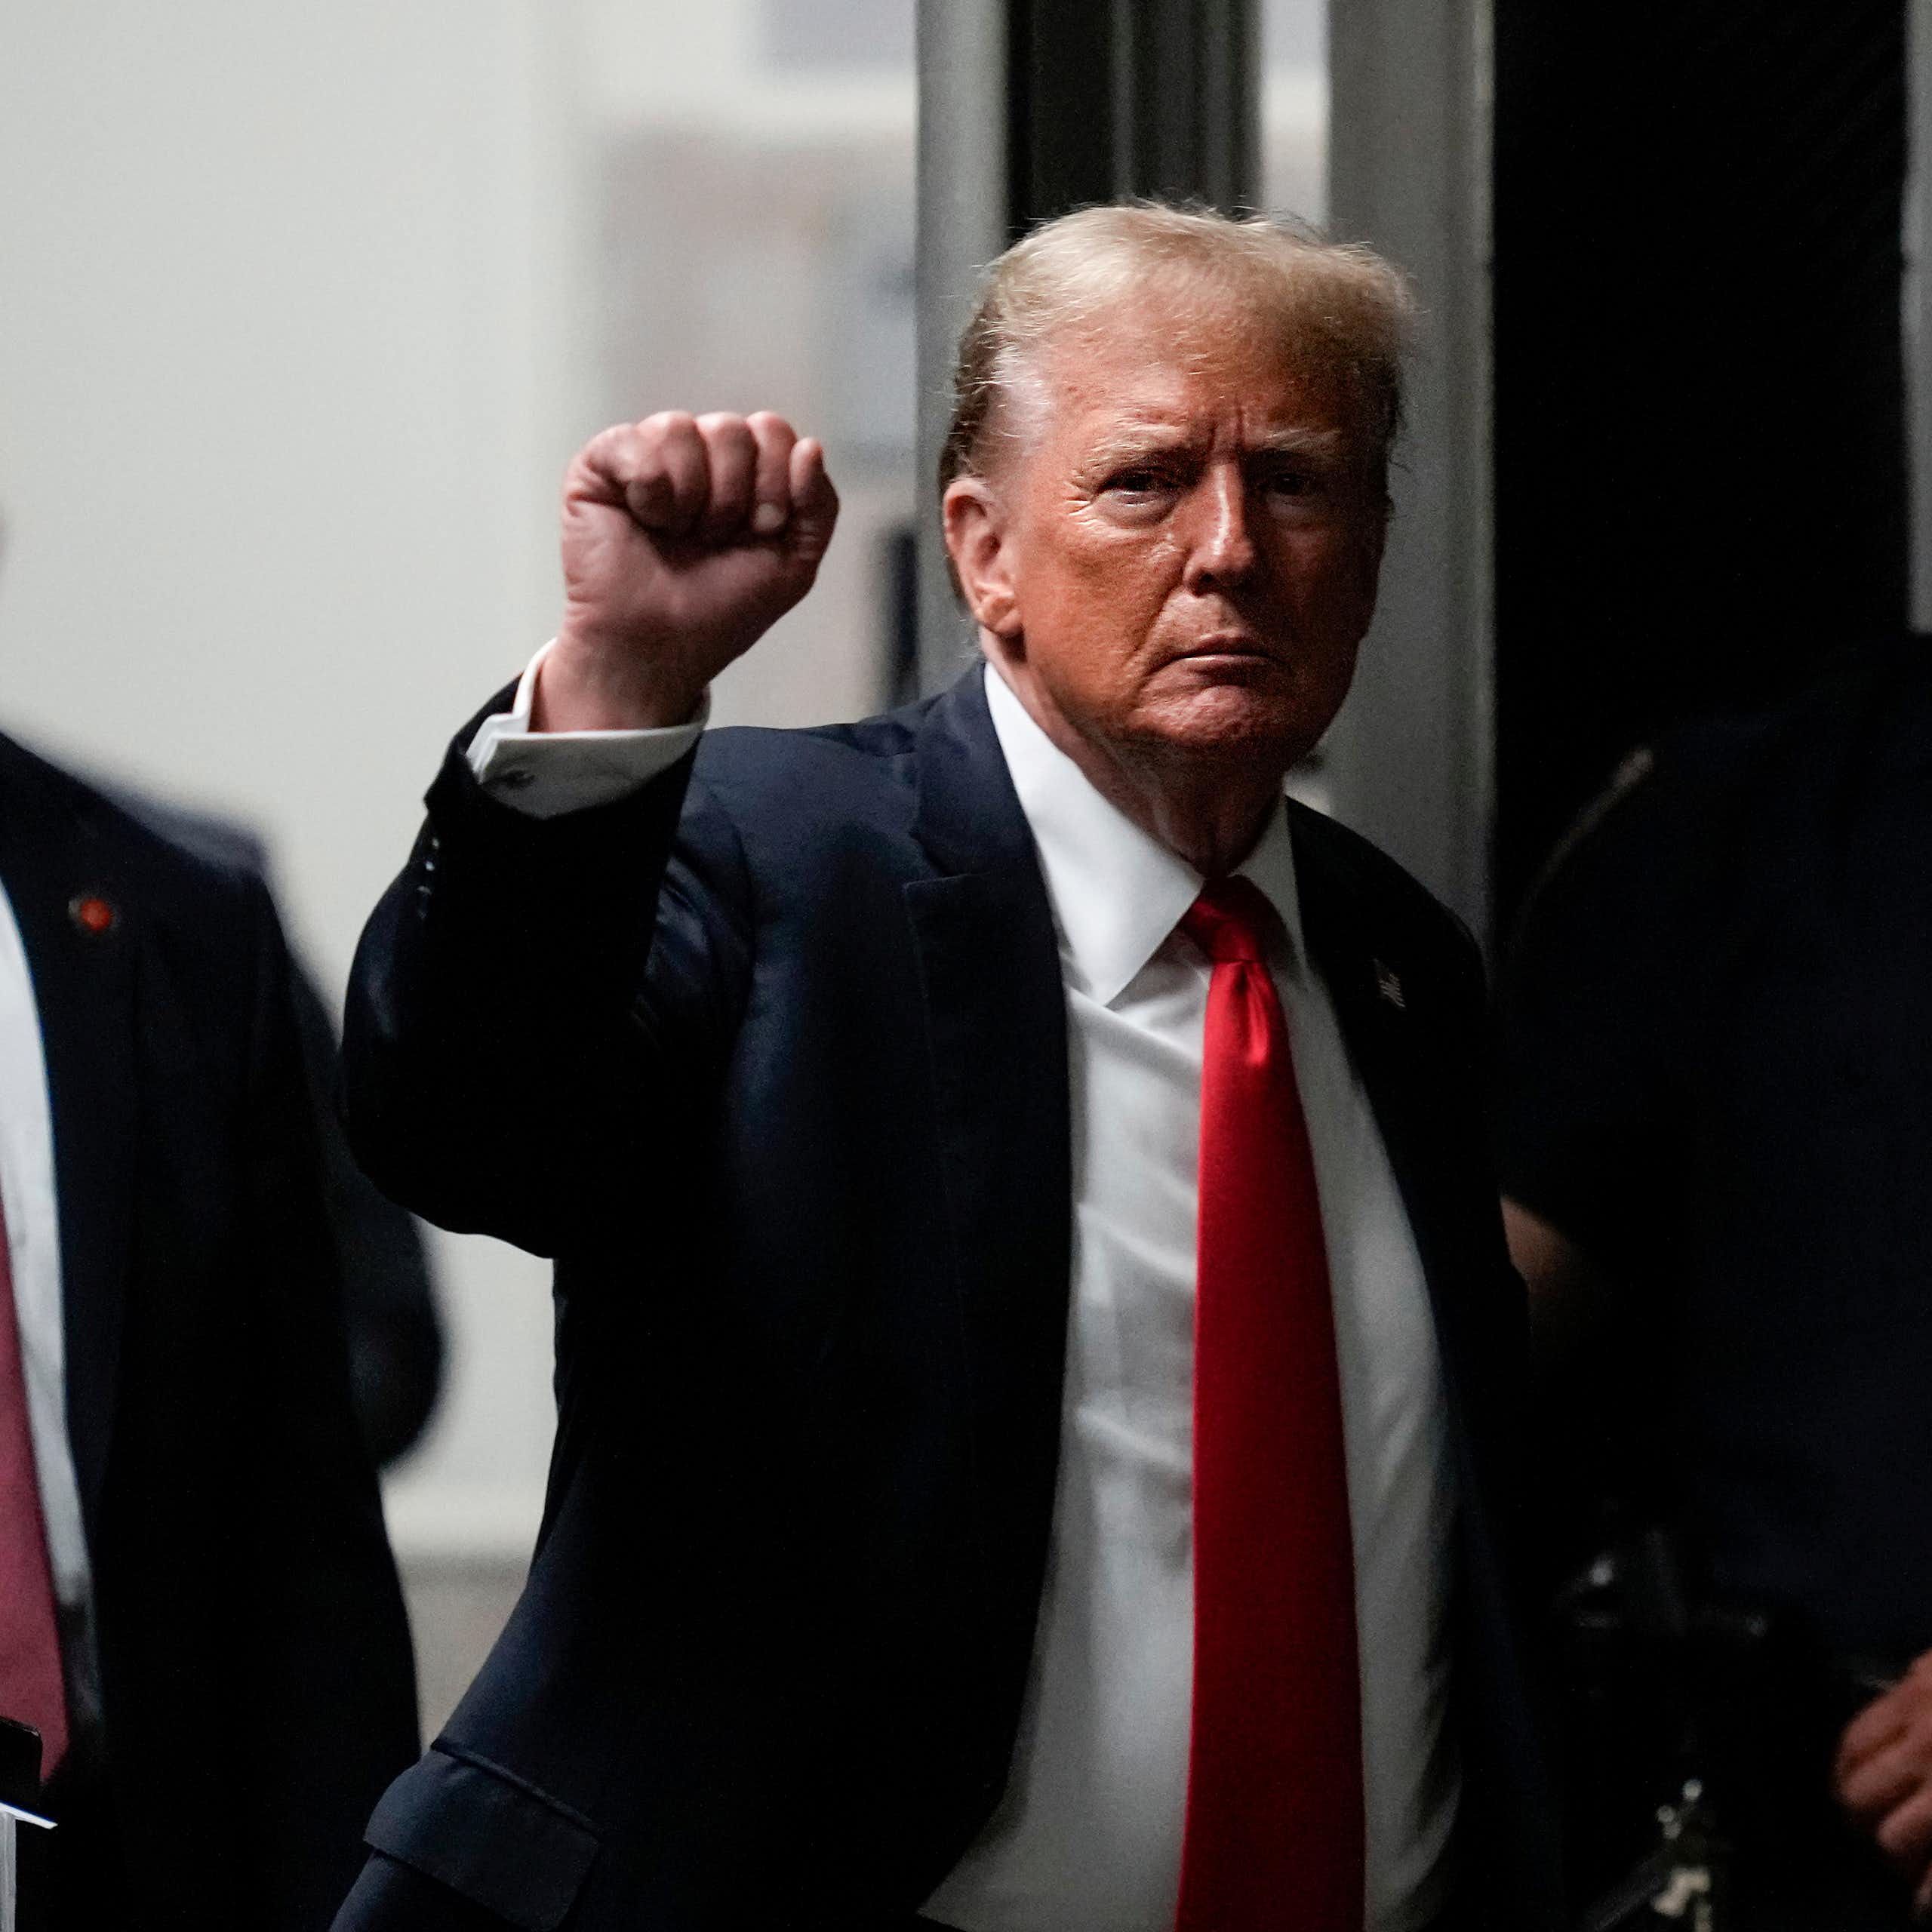 Trump holds up his fist as he walks into a court building